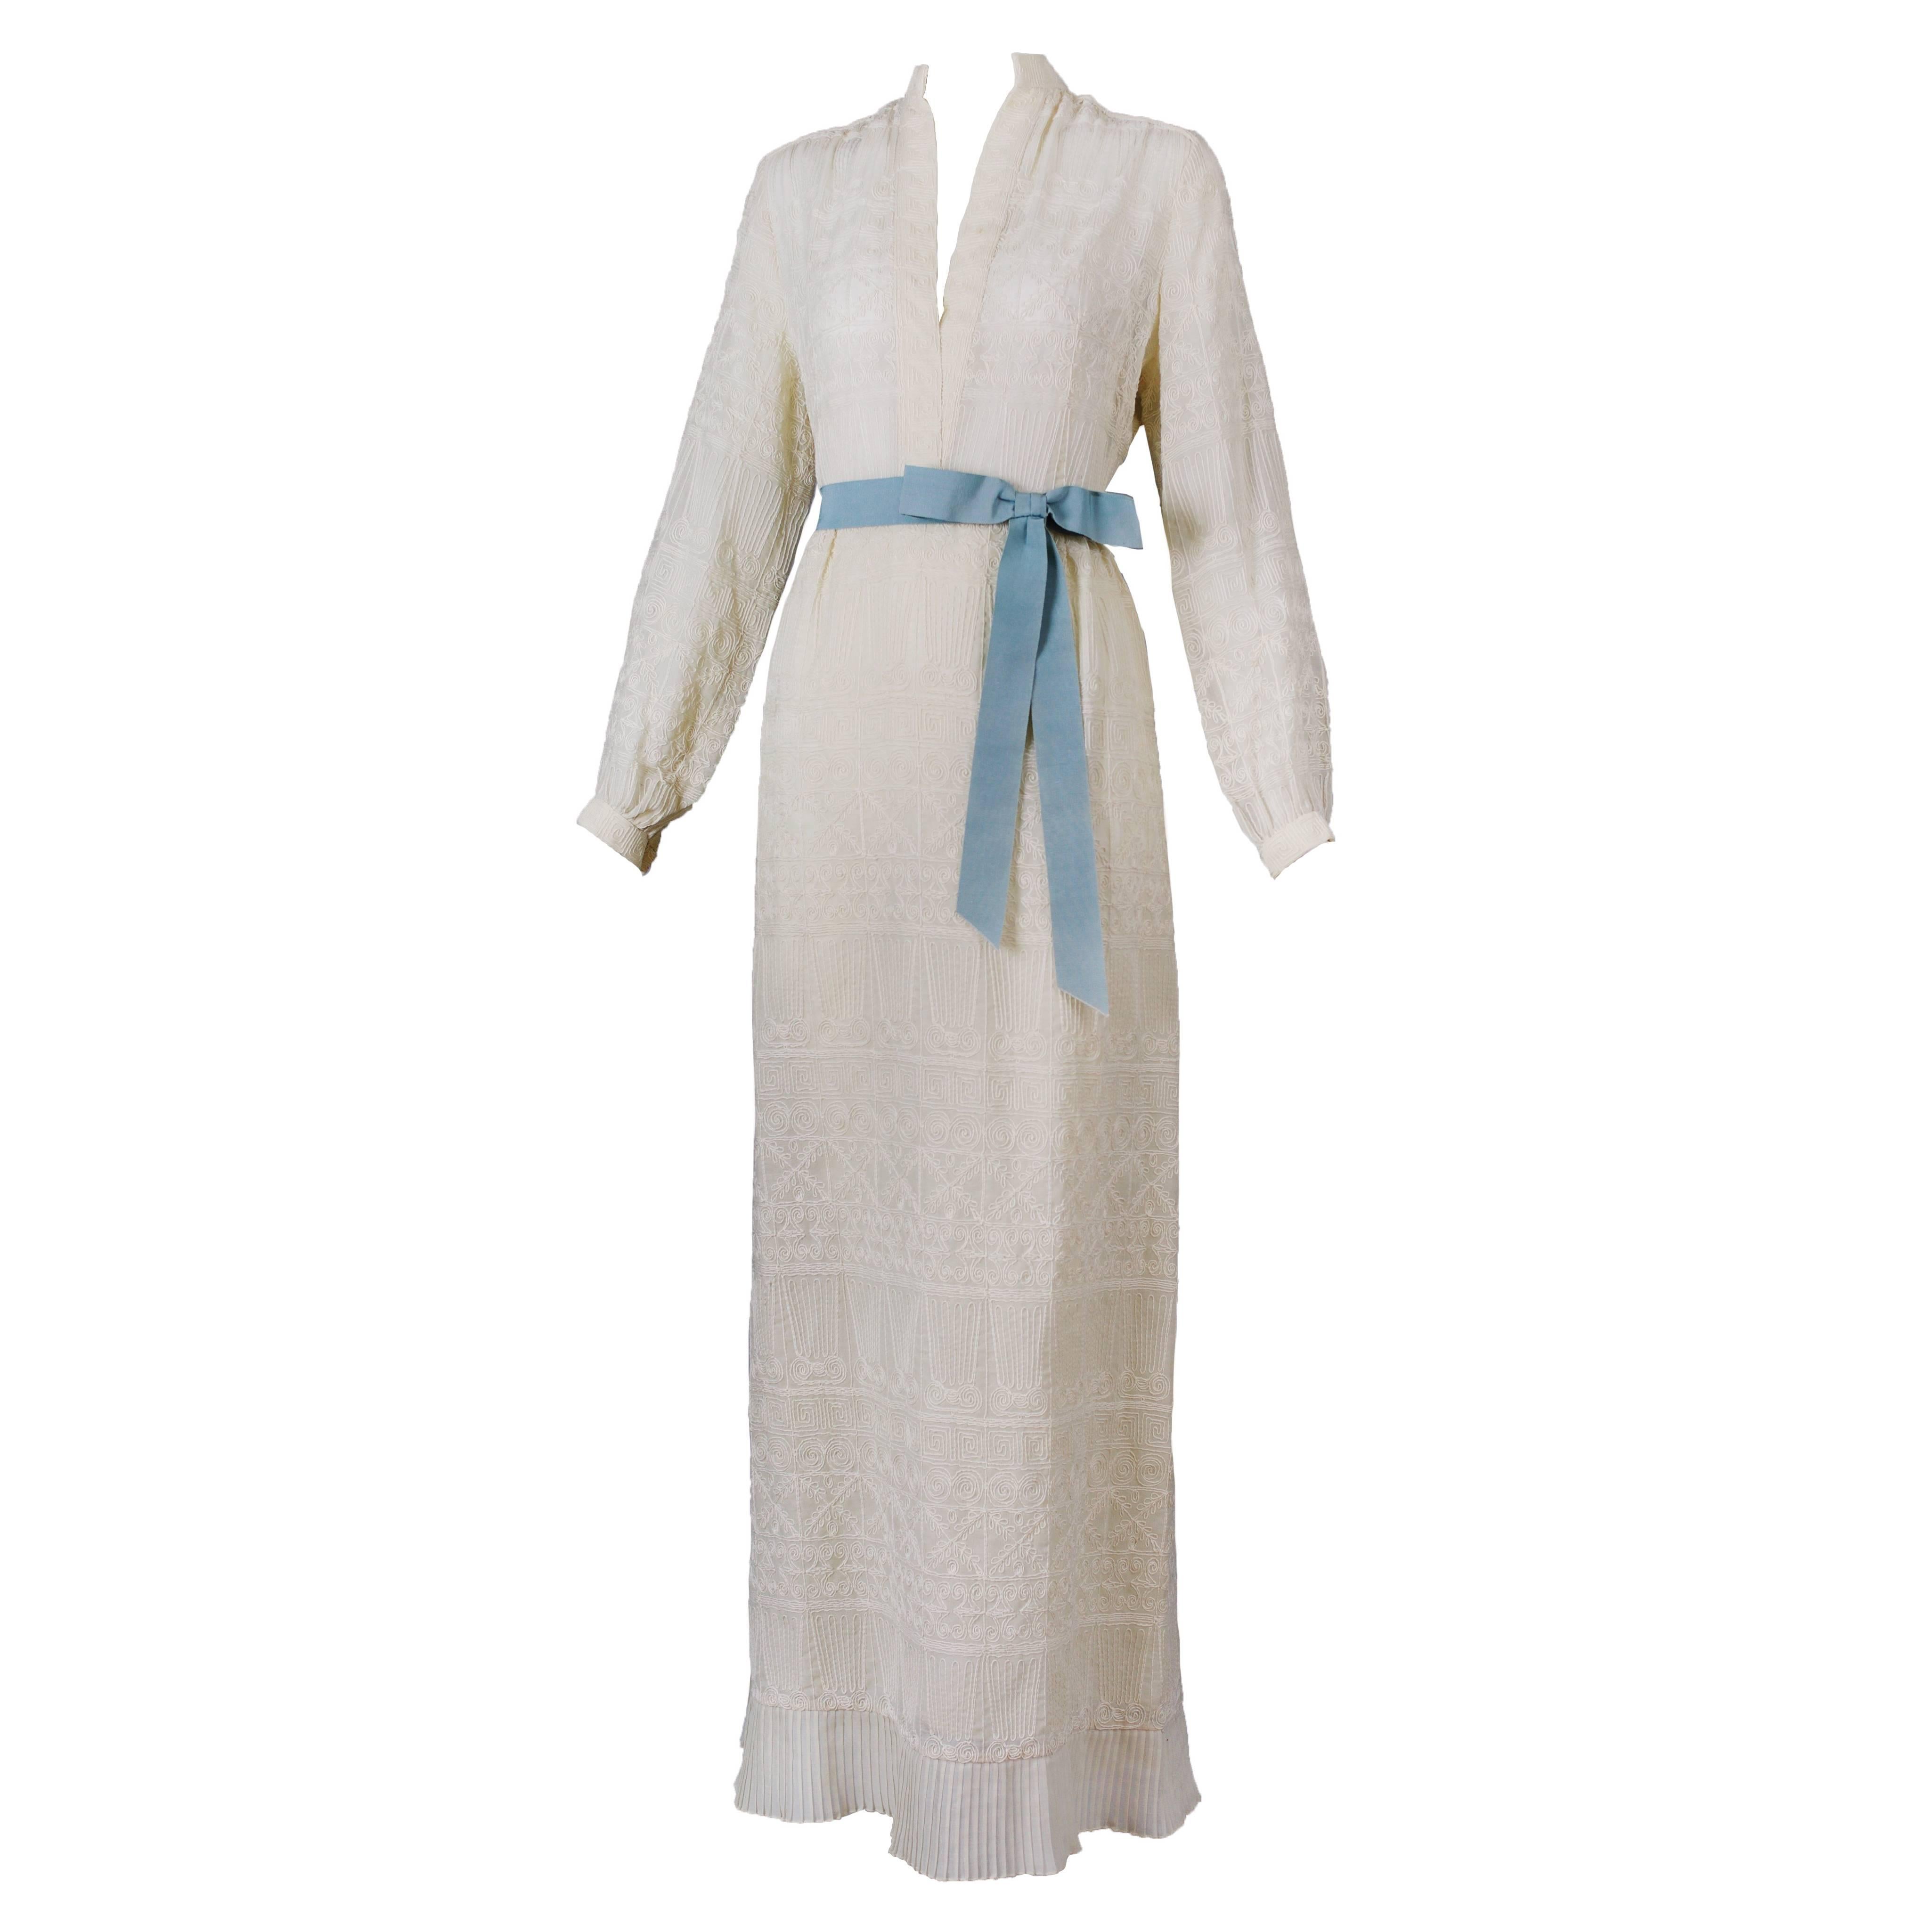 1970s Pat Sandler Embroidered Tea Gown or Wedding Gown